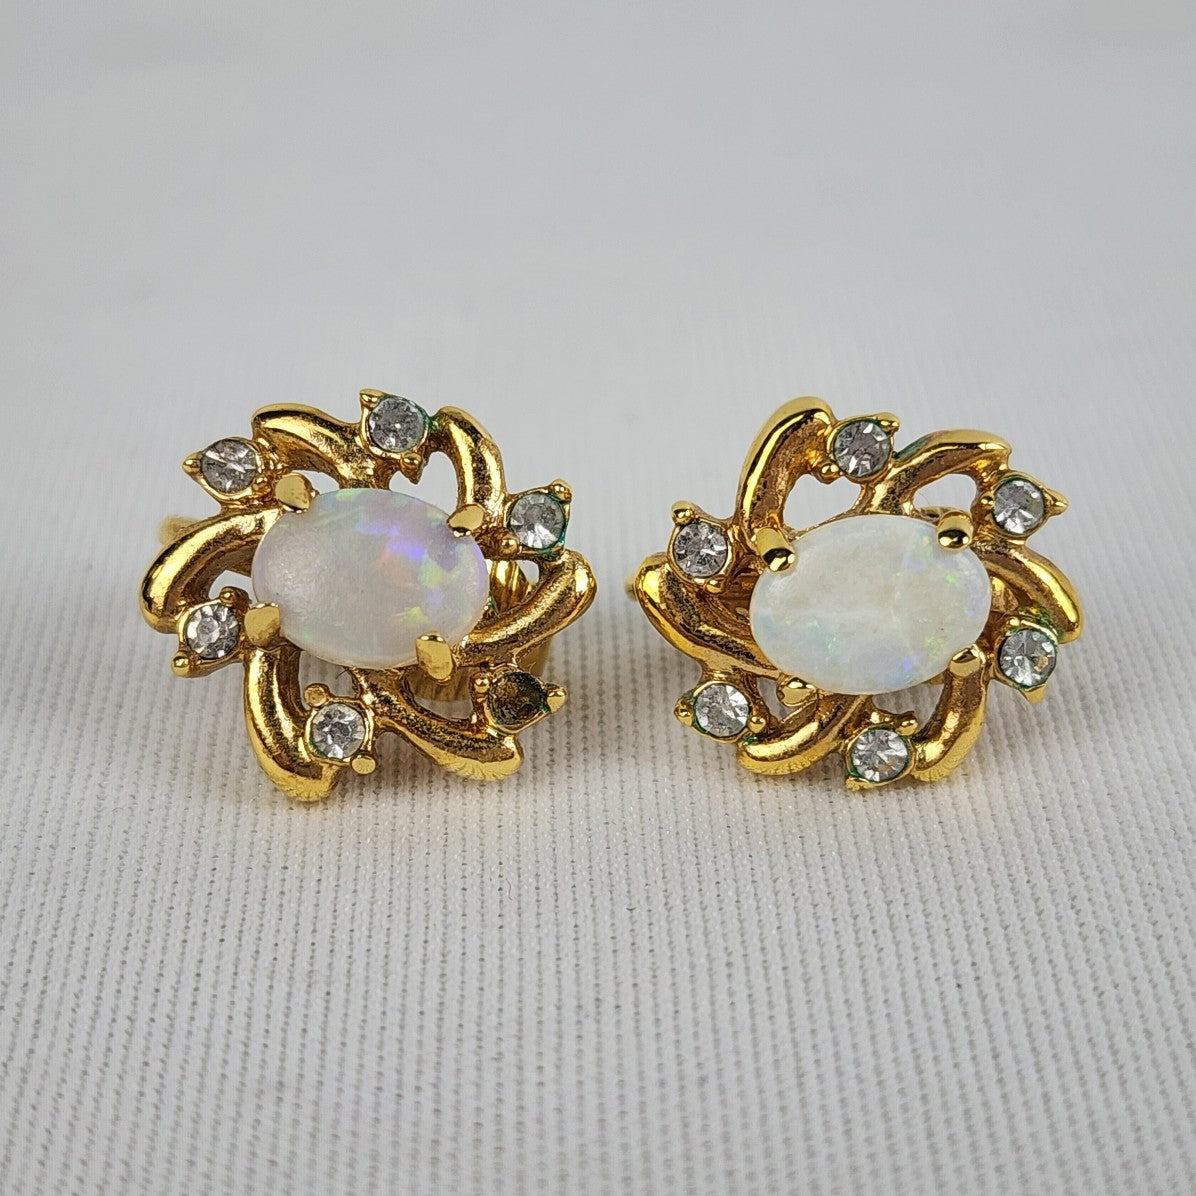 Vintage Gold Plated Opal Crystal Clip On Earrings